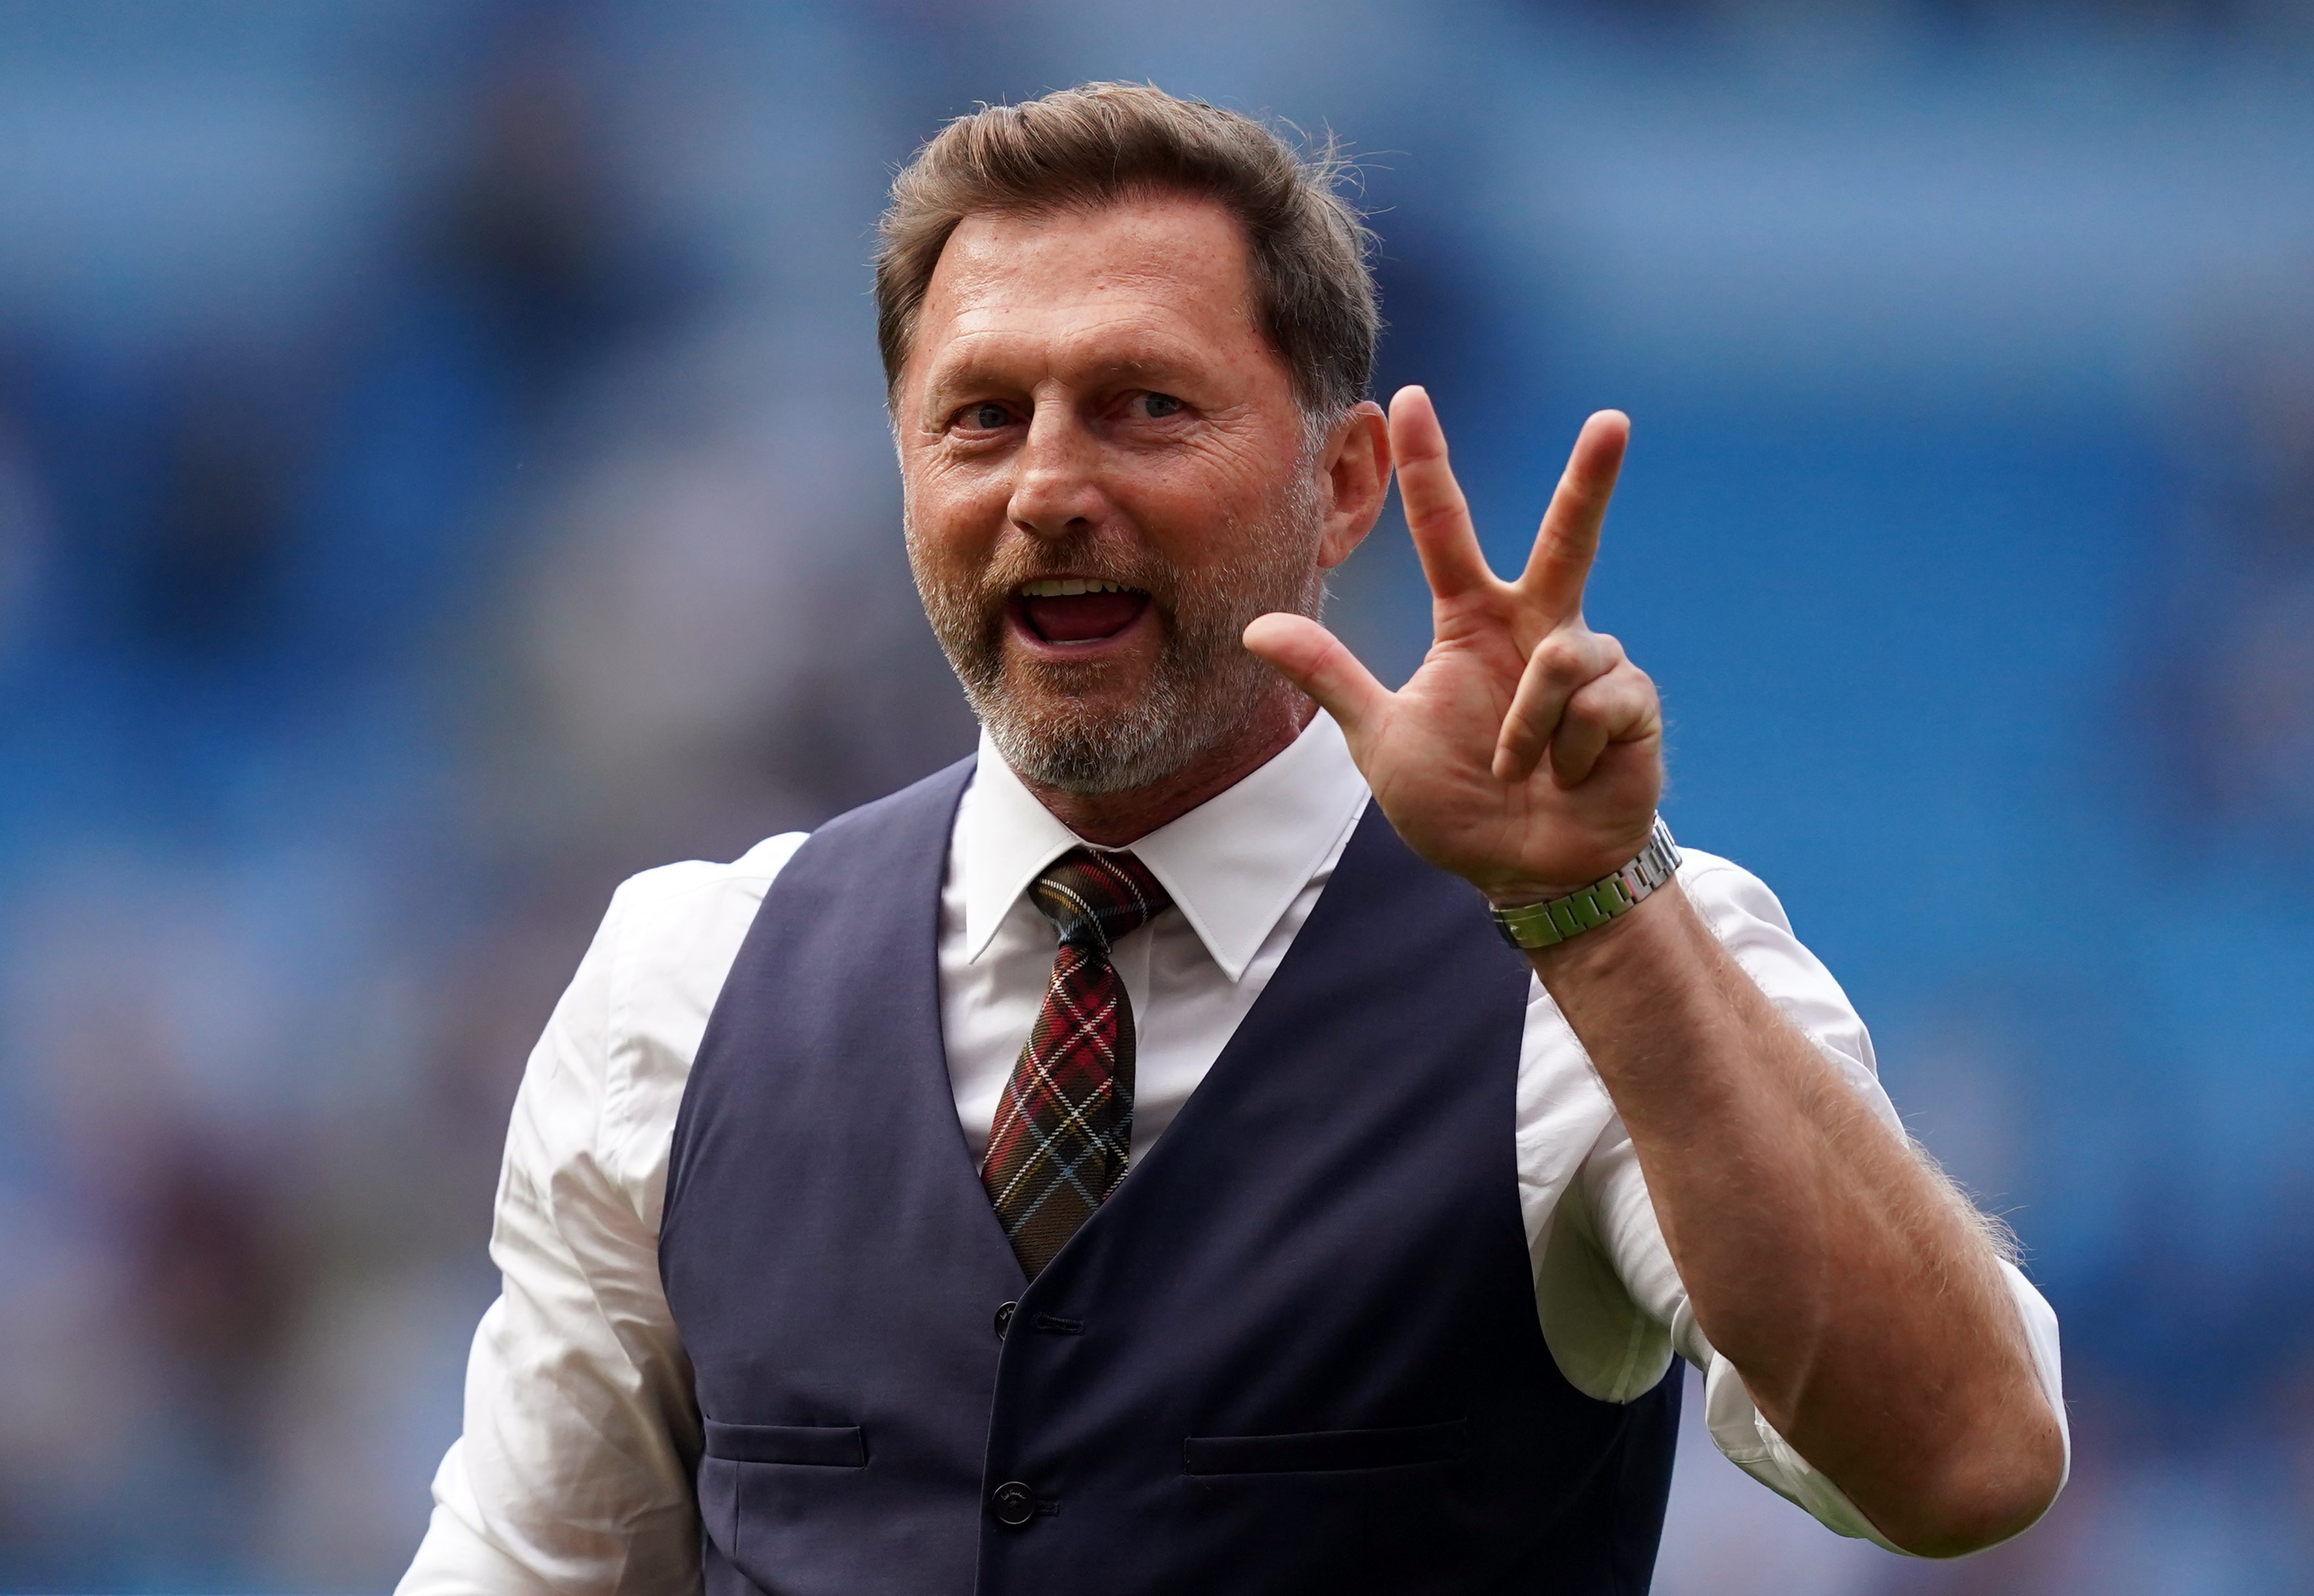 Ralph Hasenhuttl believes Southampton have genuine competition for places this season (Martin Rickett/PA)